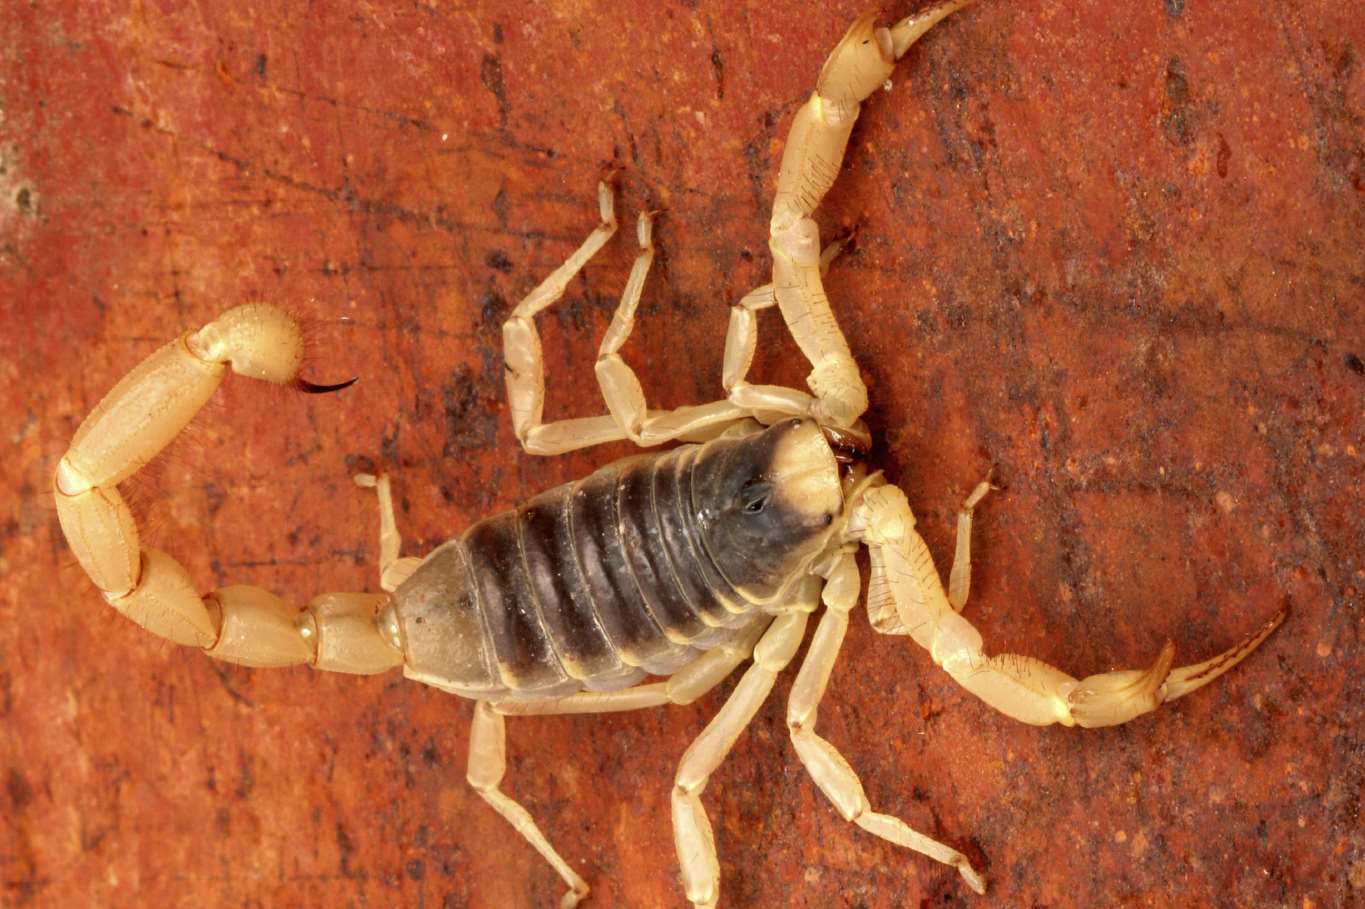 Seriously scary scorpions will also be in Ashford this Sunday